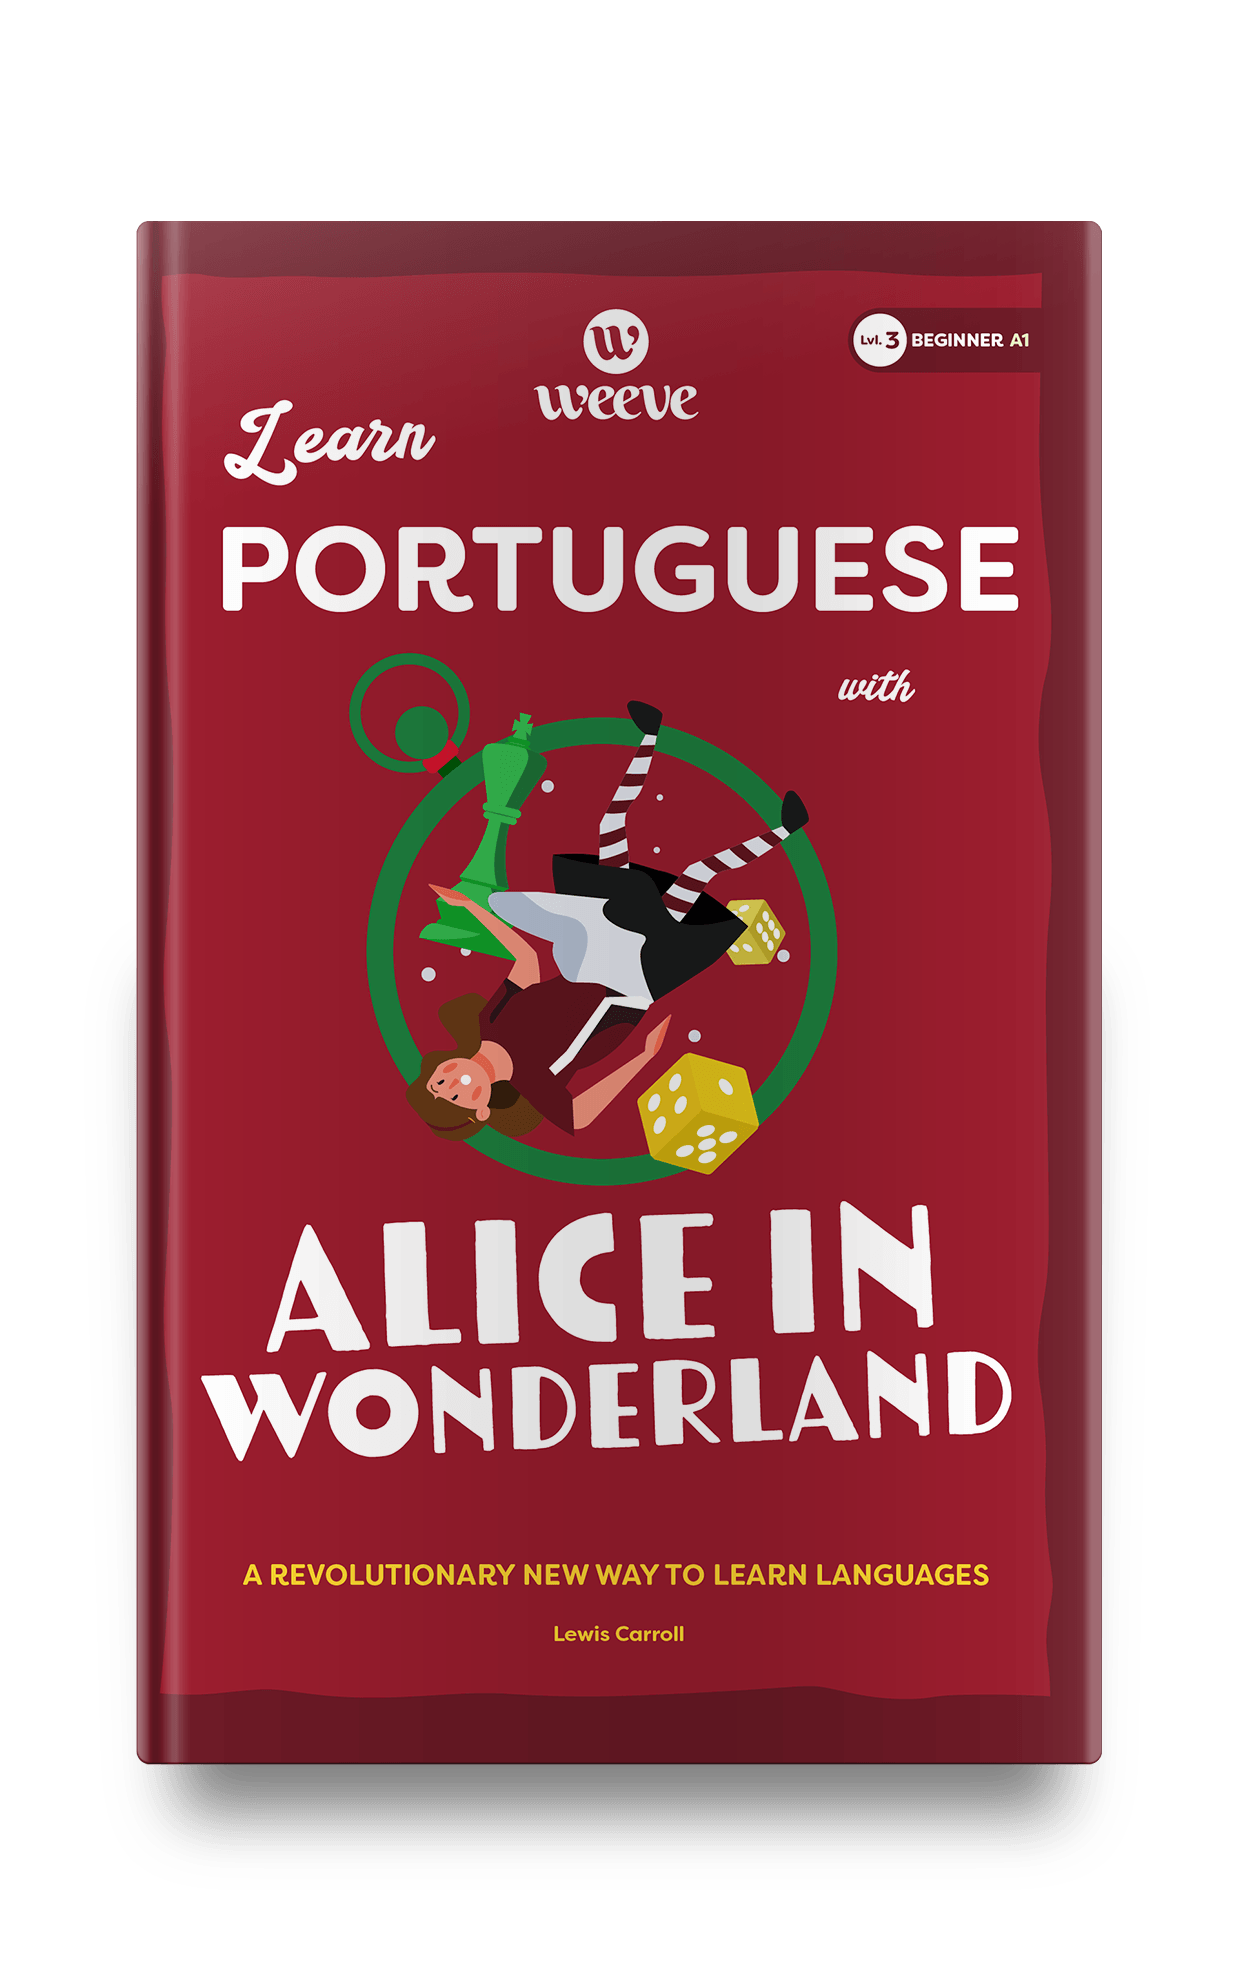 Learn Portuguese with Alice in Wonderland - Weeve